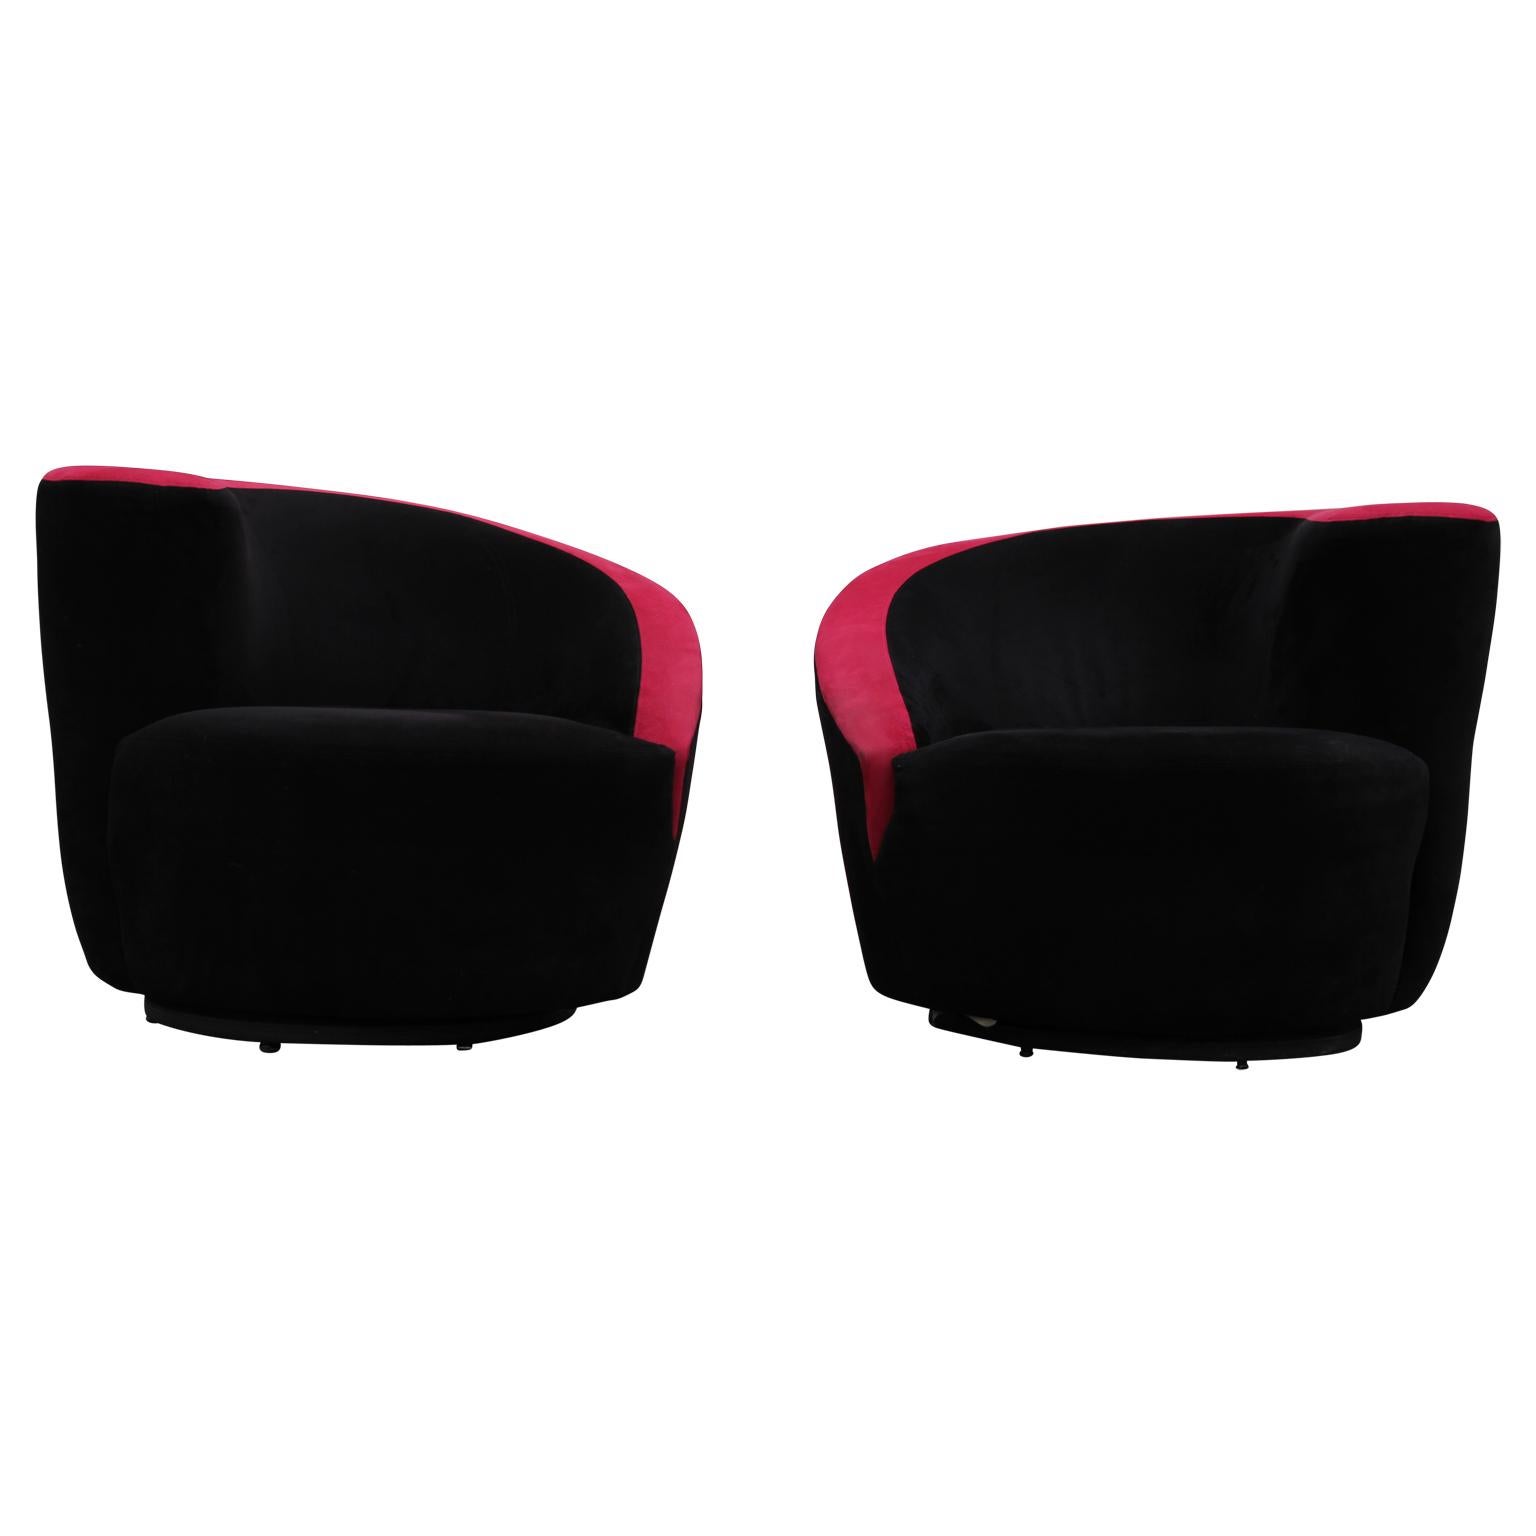 Beautiful sculptural black and red corkscrew lounge chairs that perfectly mirror each other. The swivel chairs have a unique asymmetrical design with a curved, swooping back line that makes the perfect comfortable lounge chair. Reupholstering the